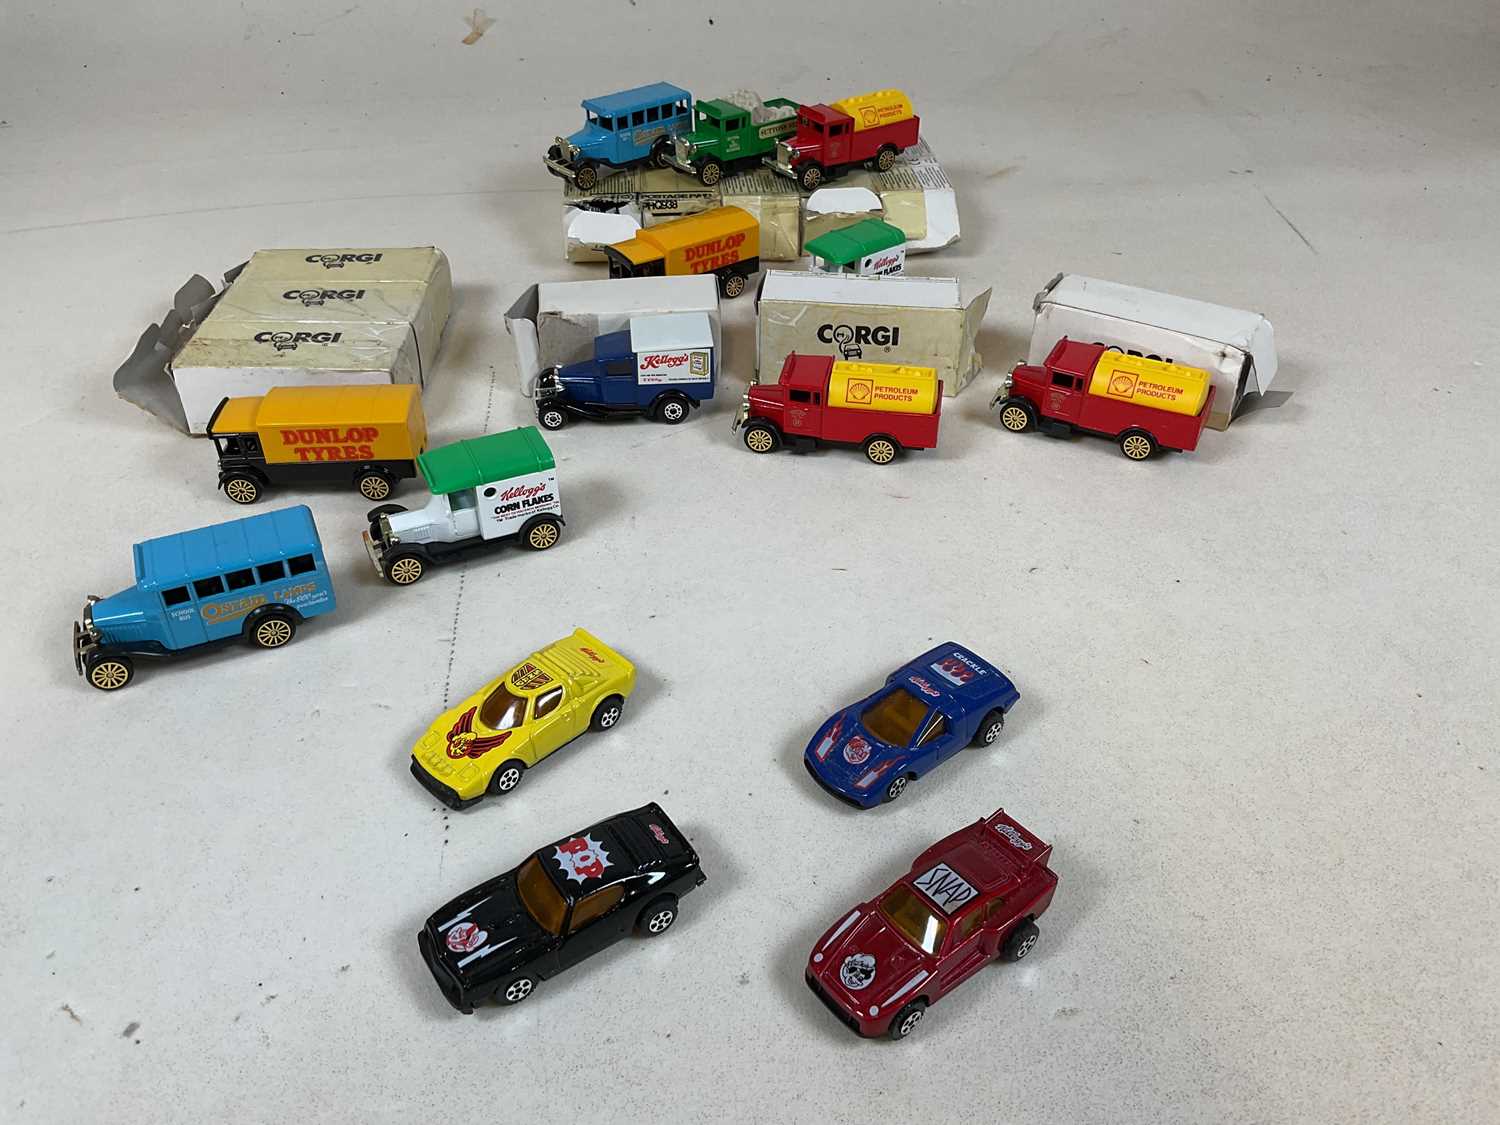 A large collection of model vehicles, all boxed including Lledo, Corgi, Tonka, etc (approx 40). - Image 7 of 7